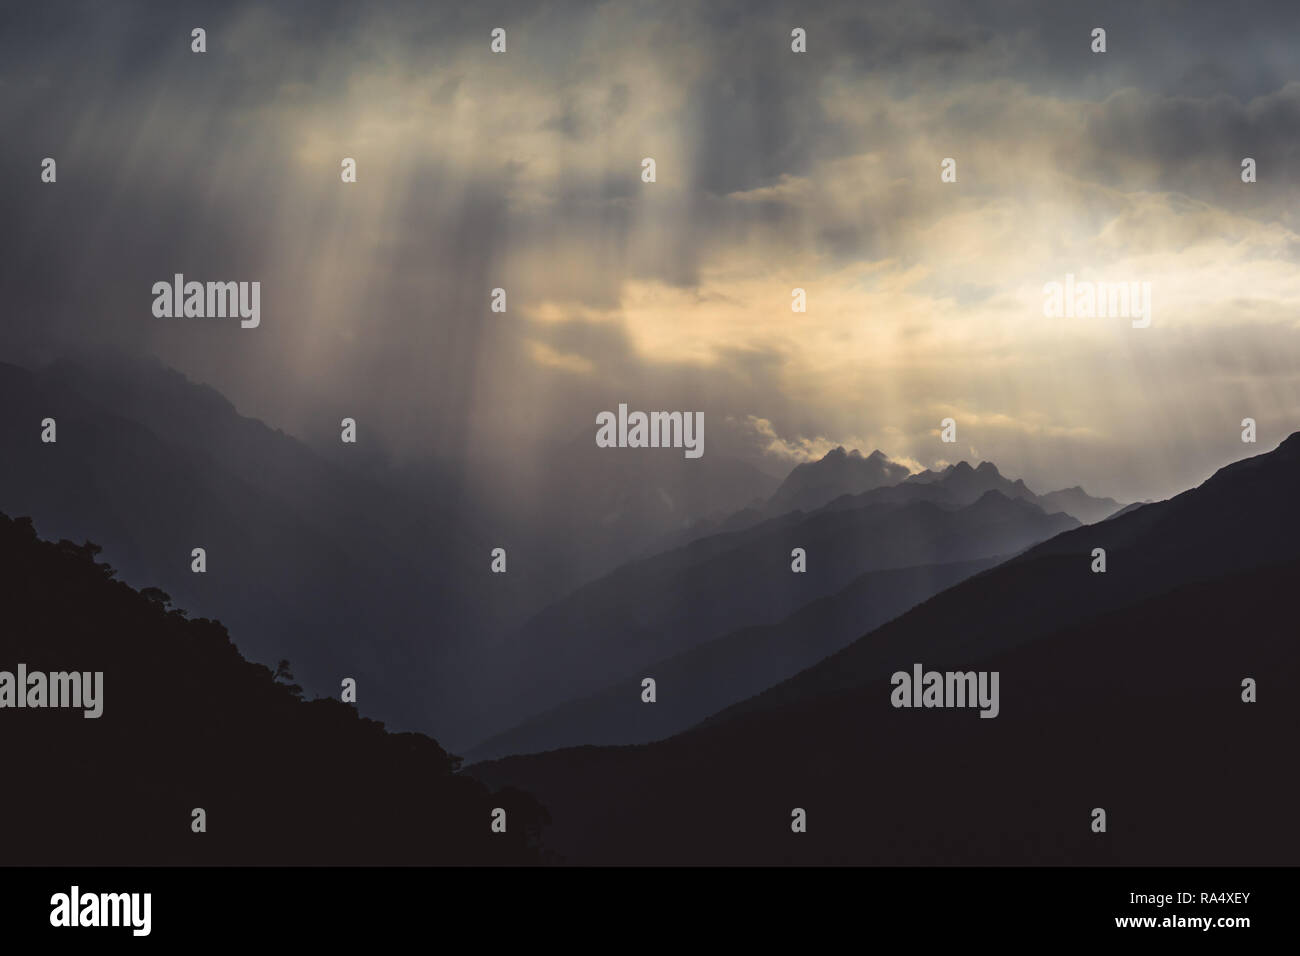 Beams of sunlight shiny through grey clouds over a rugged mountain range in a moody wilderness landscape Stock Photo